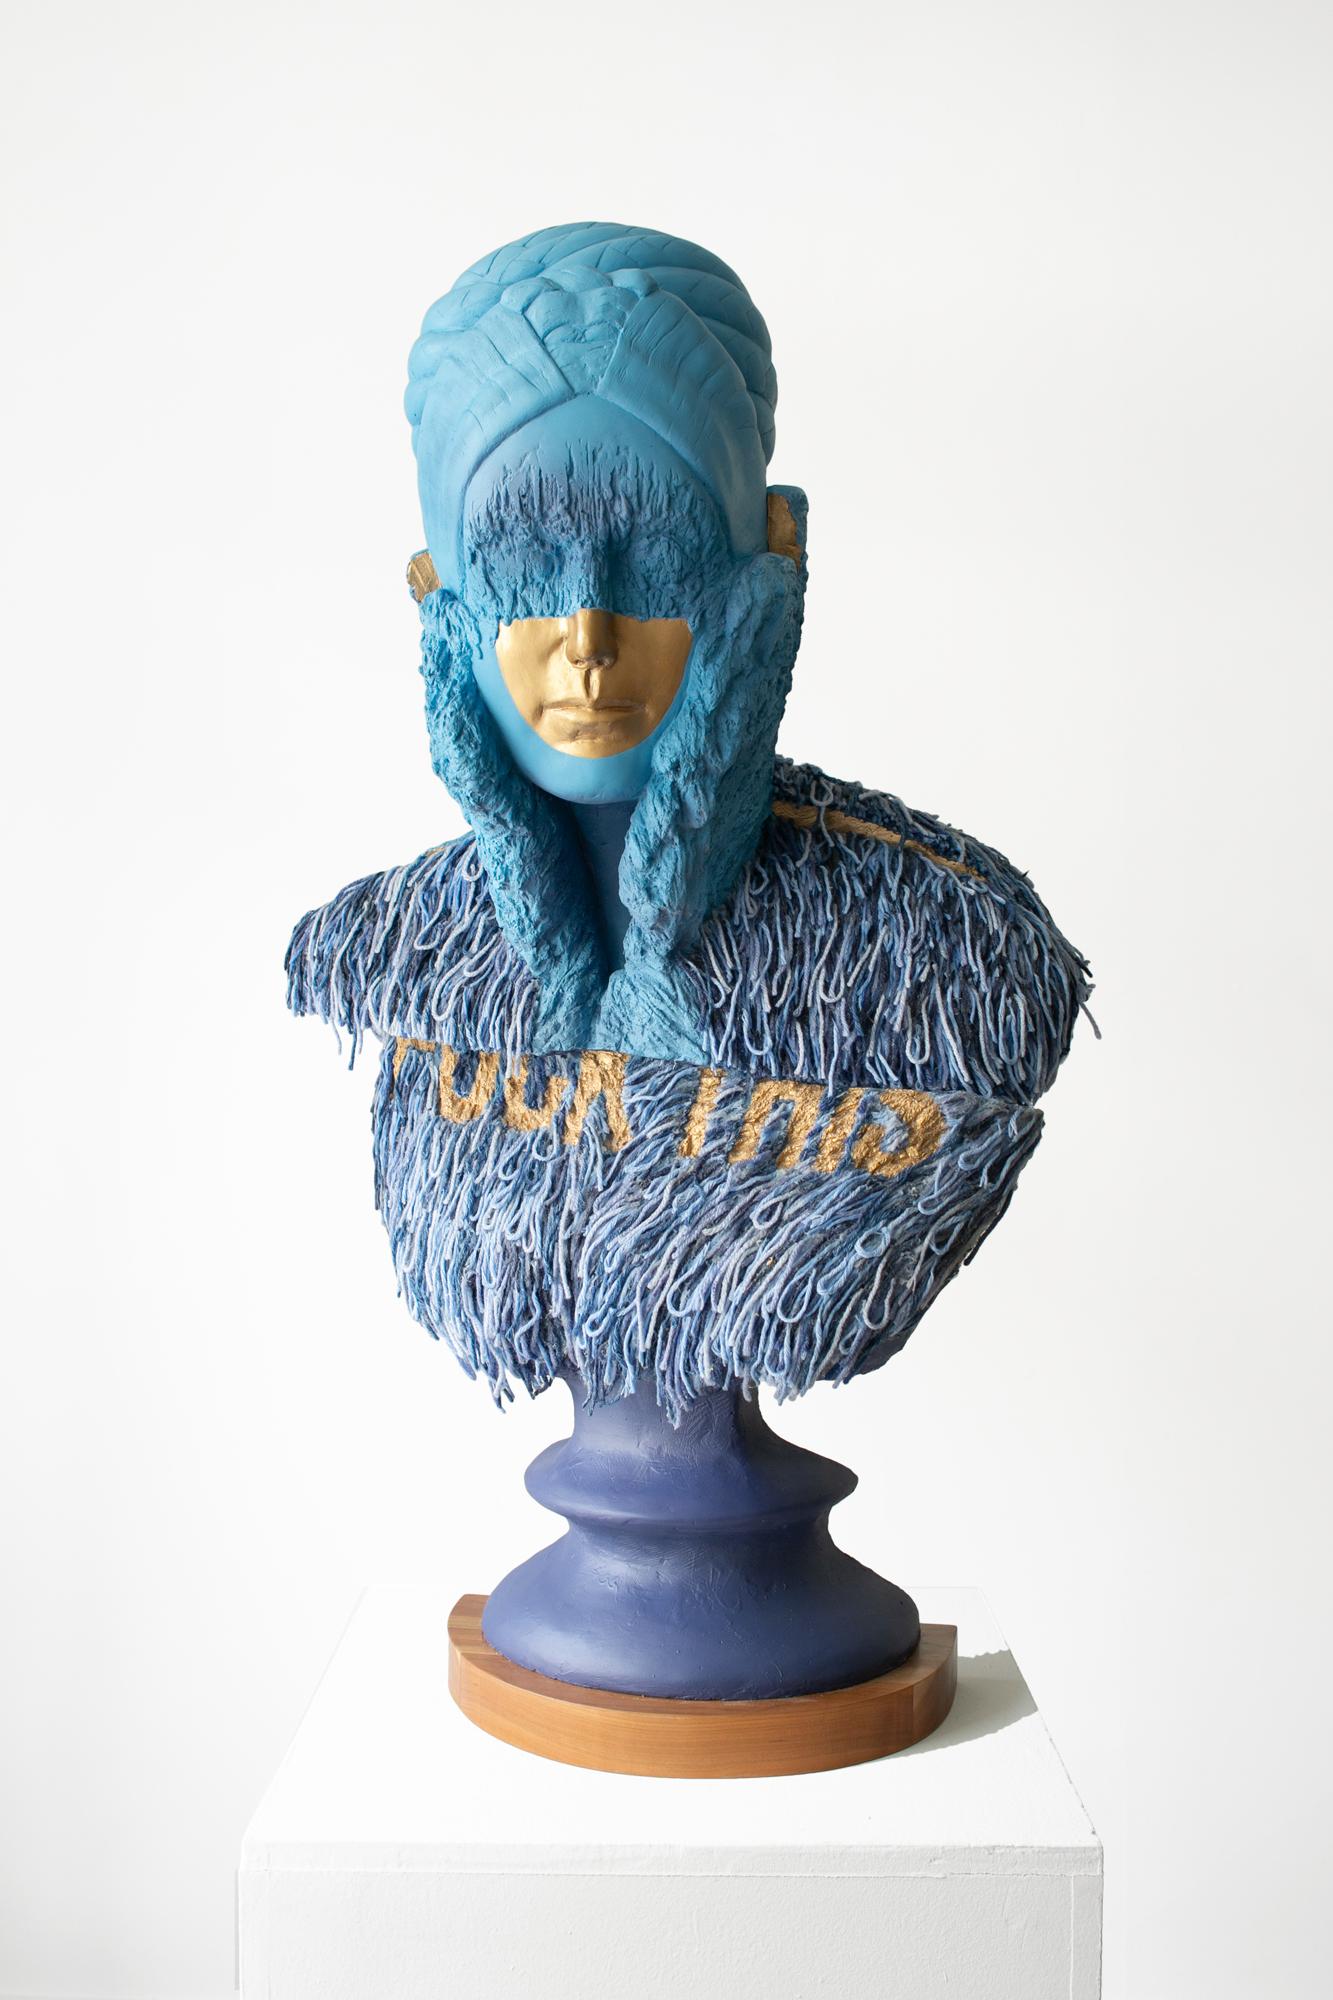 Jedediah Morfit Abstract Sculpture - "Parting Lines", Blue and Gold-Colored, Metallic Figurative Bust, Sculpture